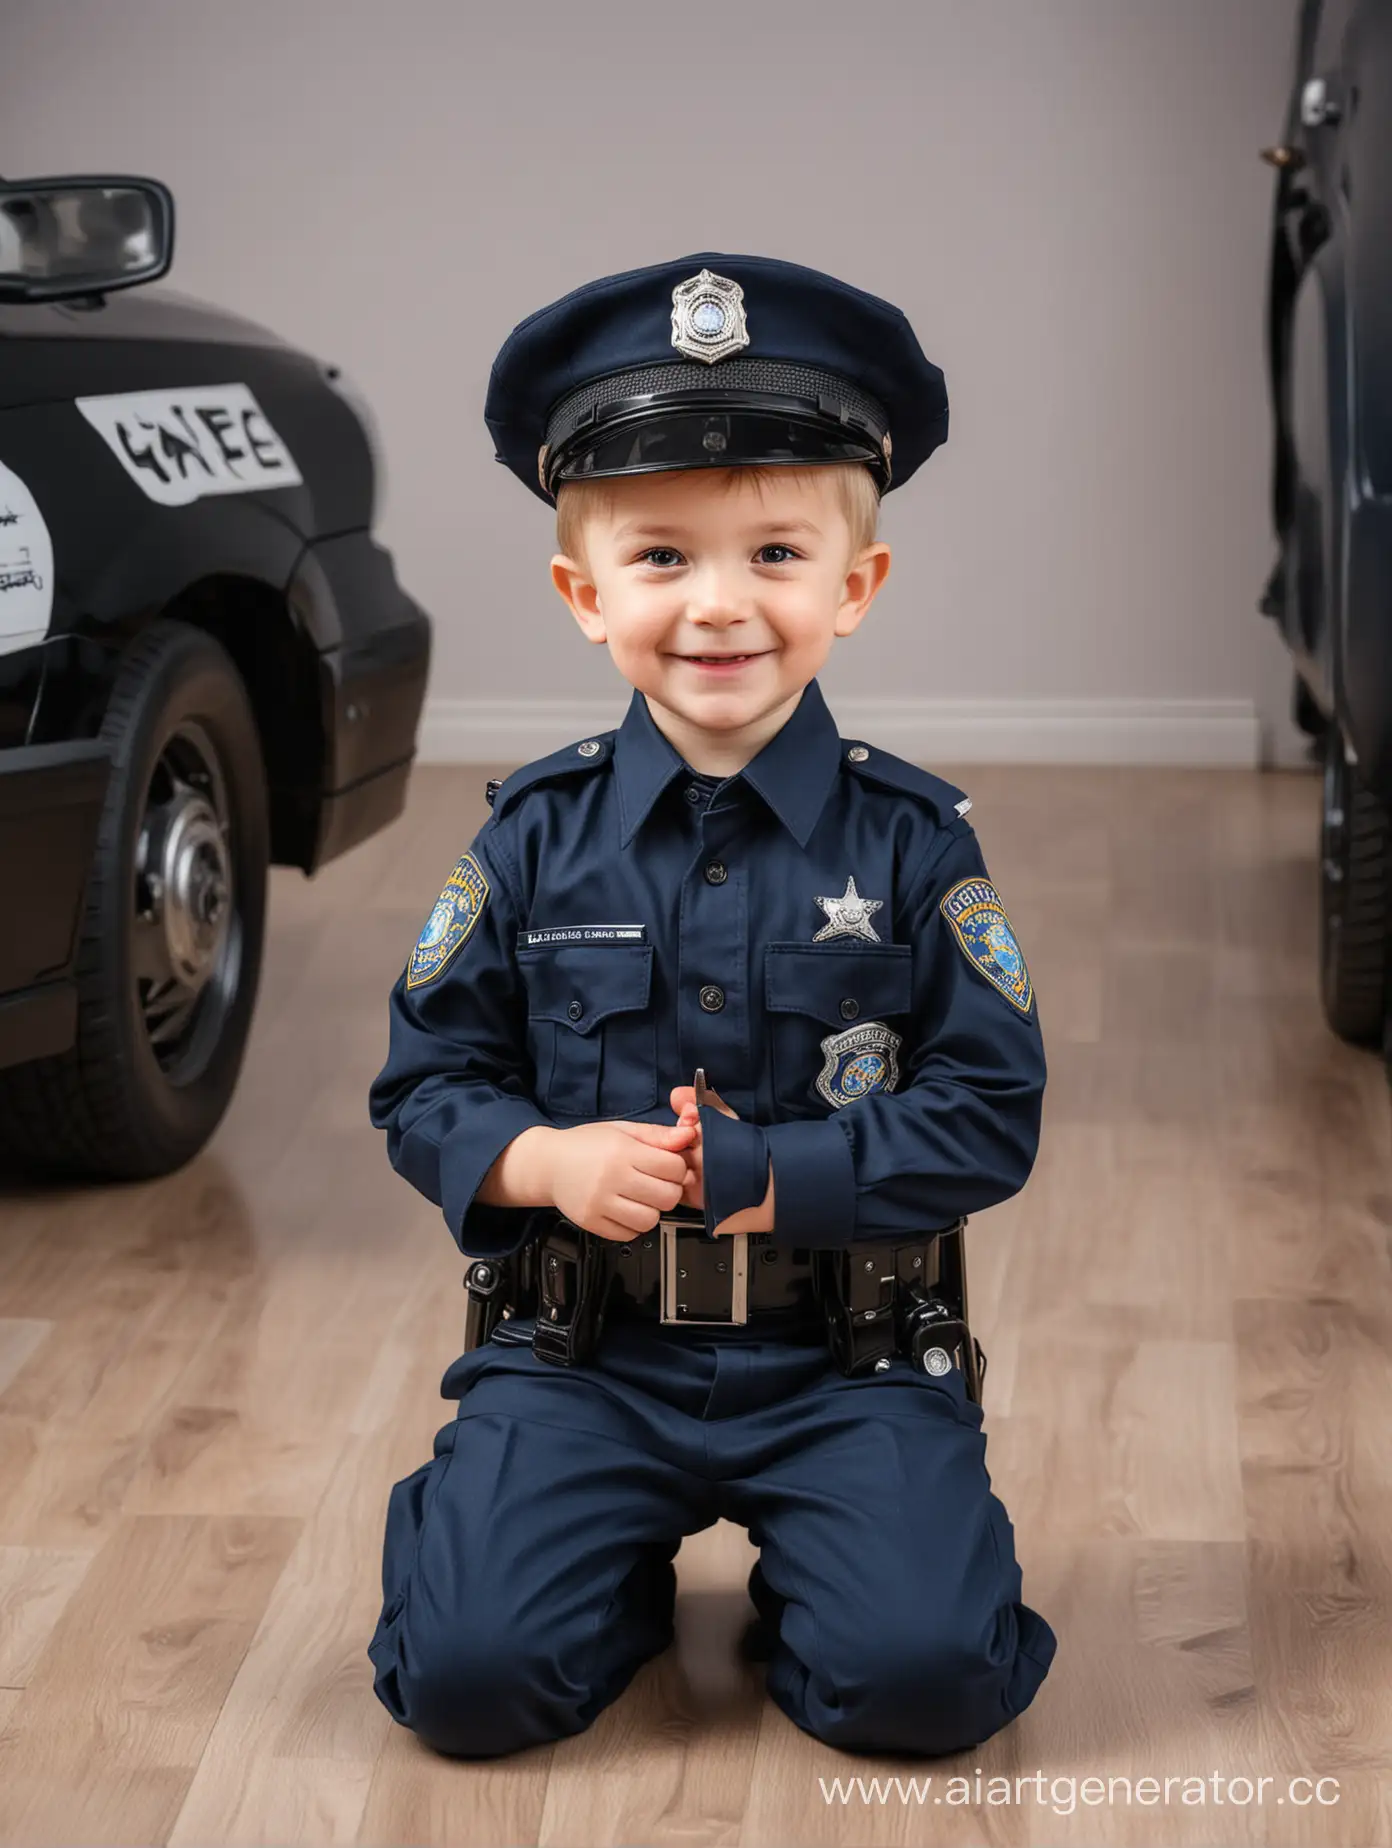 Joyful-Little-Boy-Playing-with-Toy-Cars-in-Police-Uniform